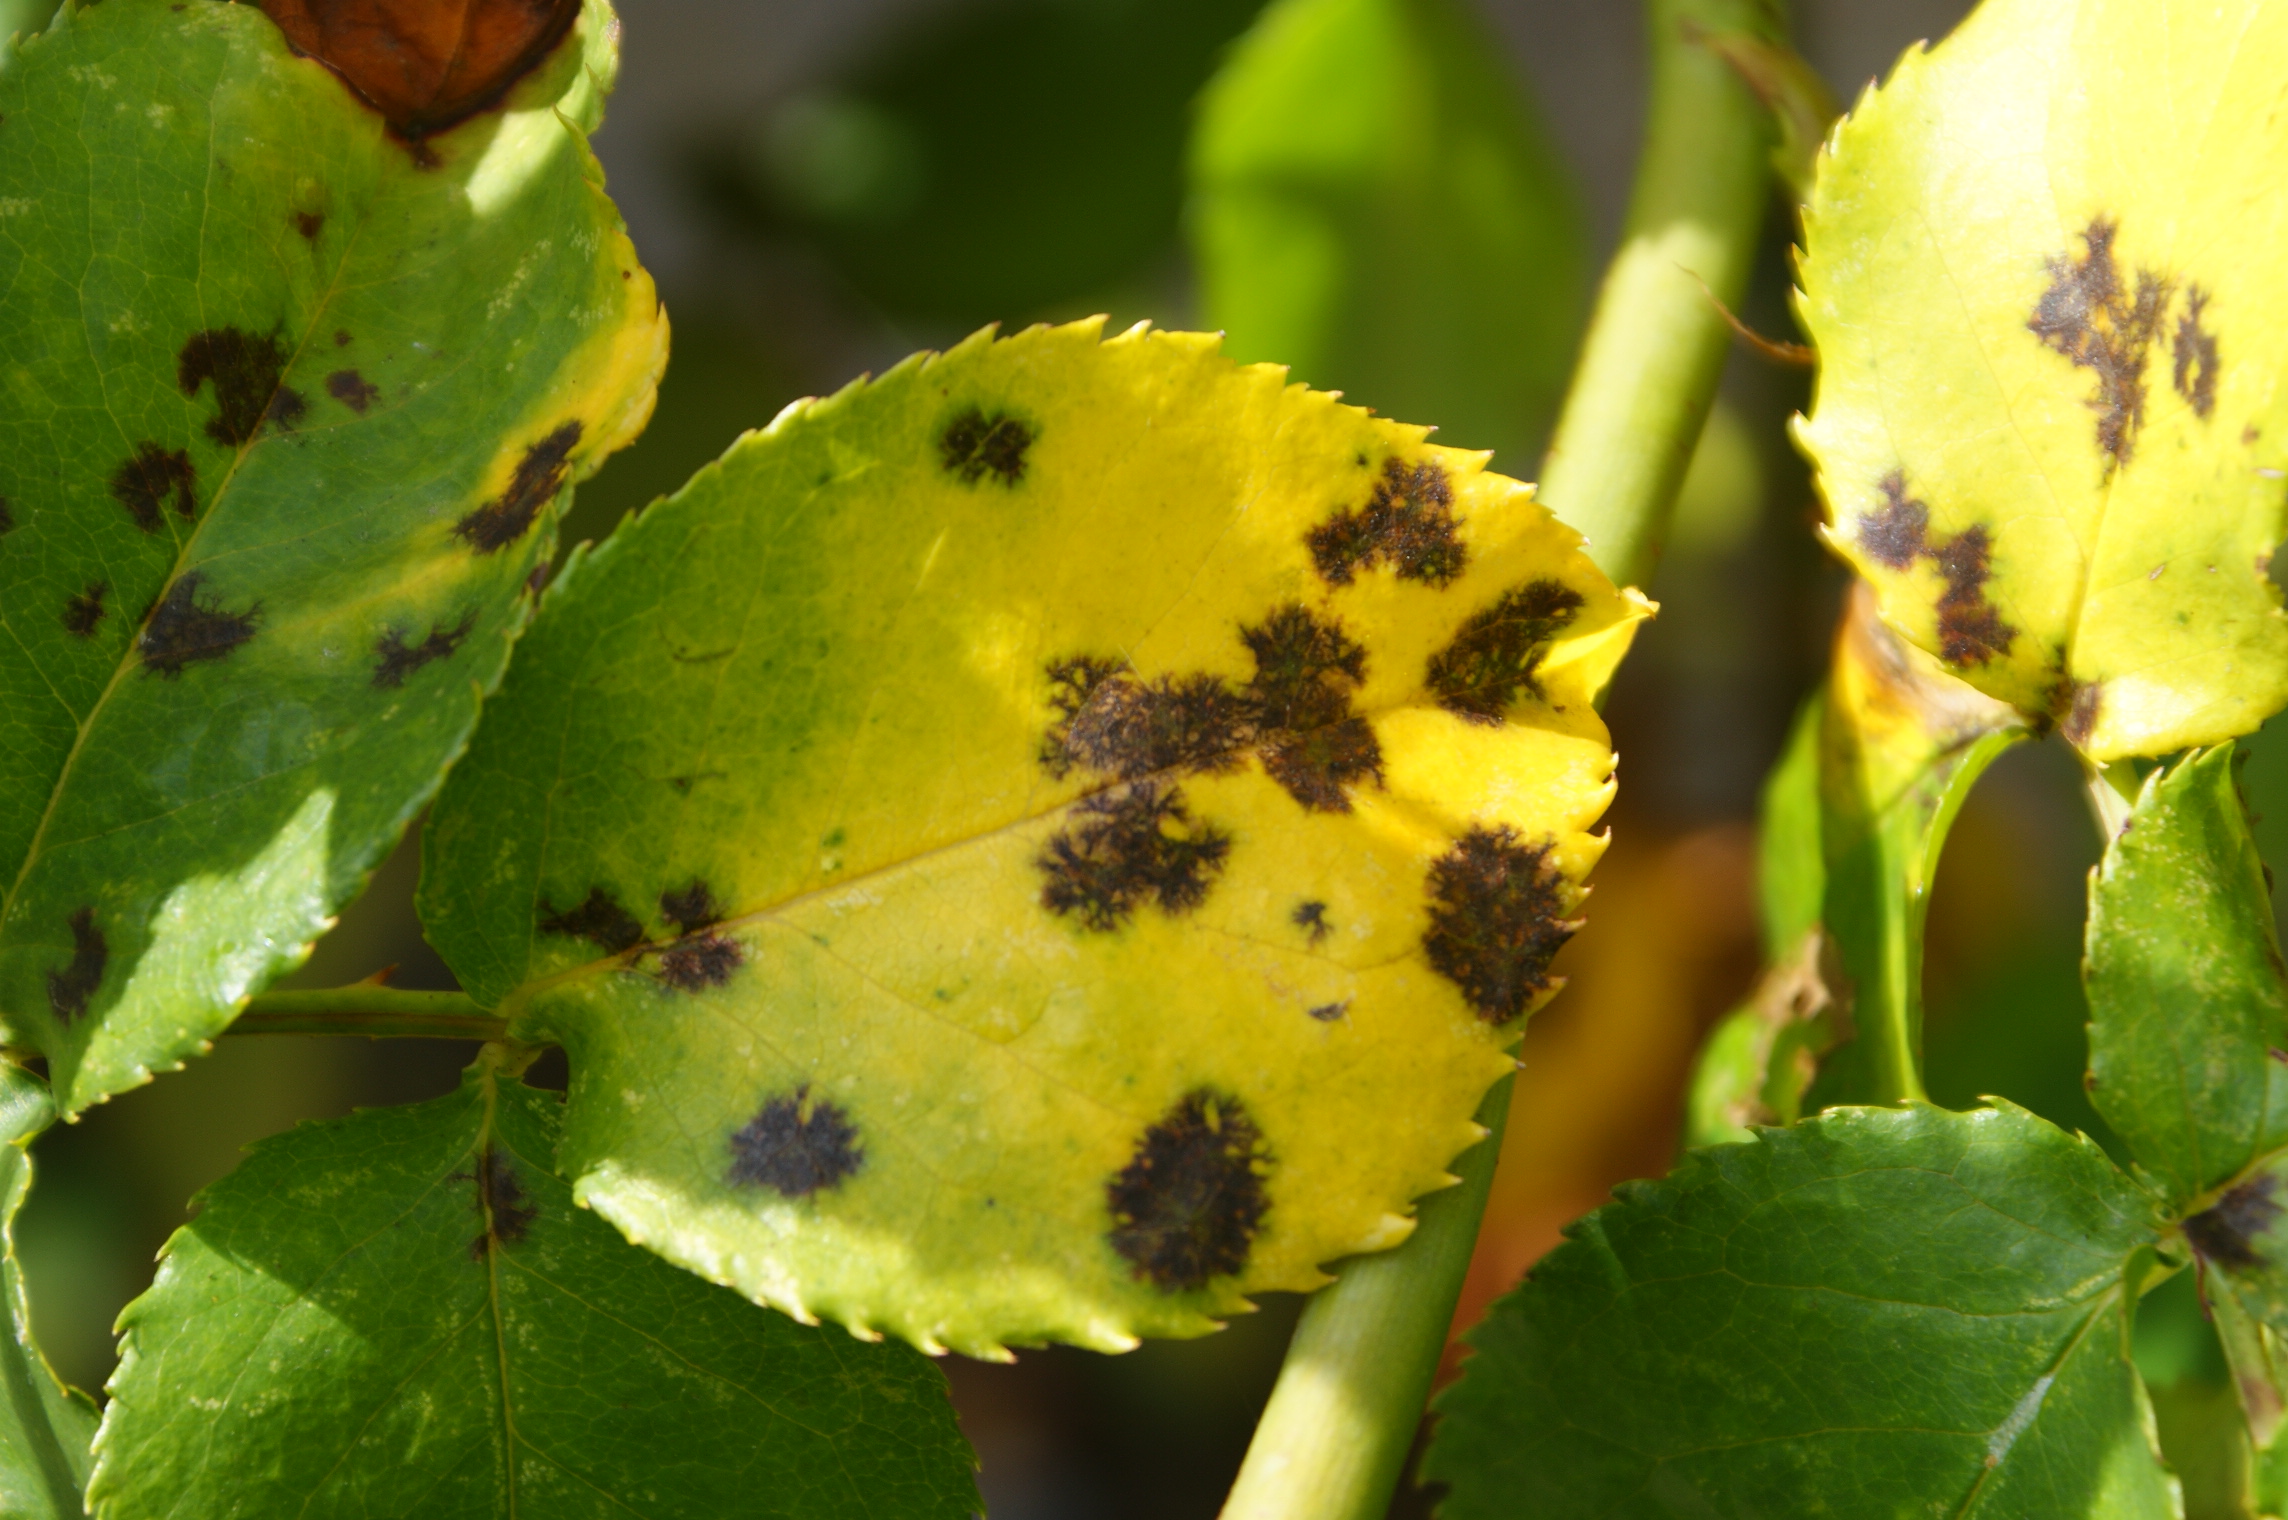 Who doesn't recognize black spot on roses? One simple method is to deadhead roses regularly, pruning out the damaged leaves as you go.